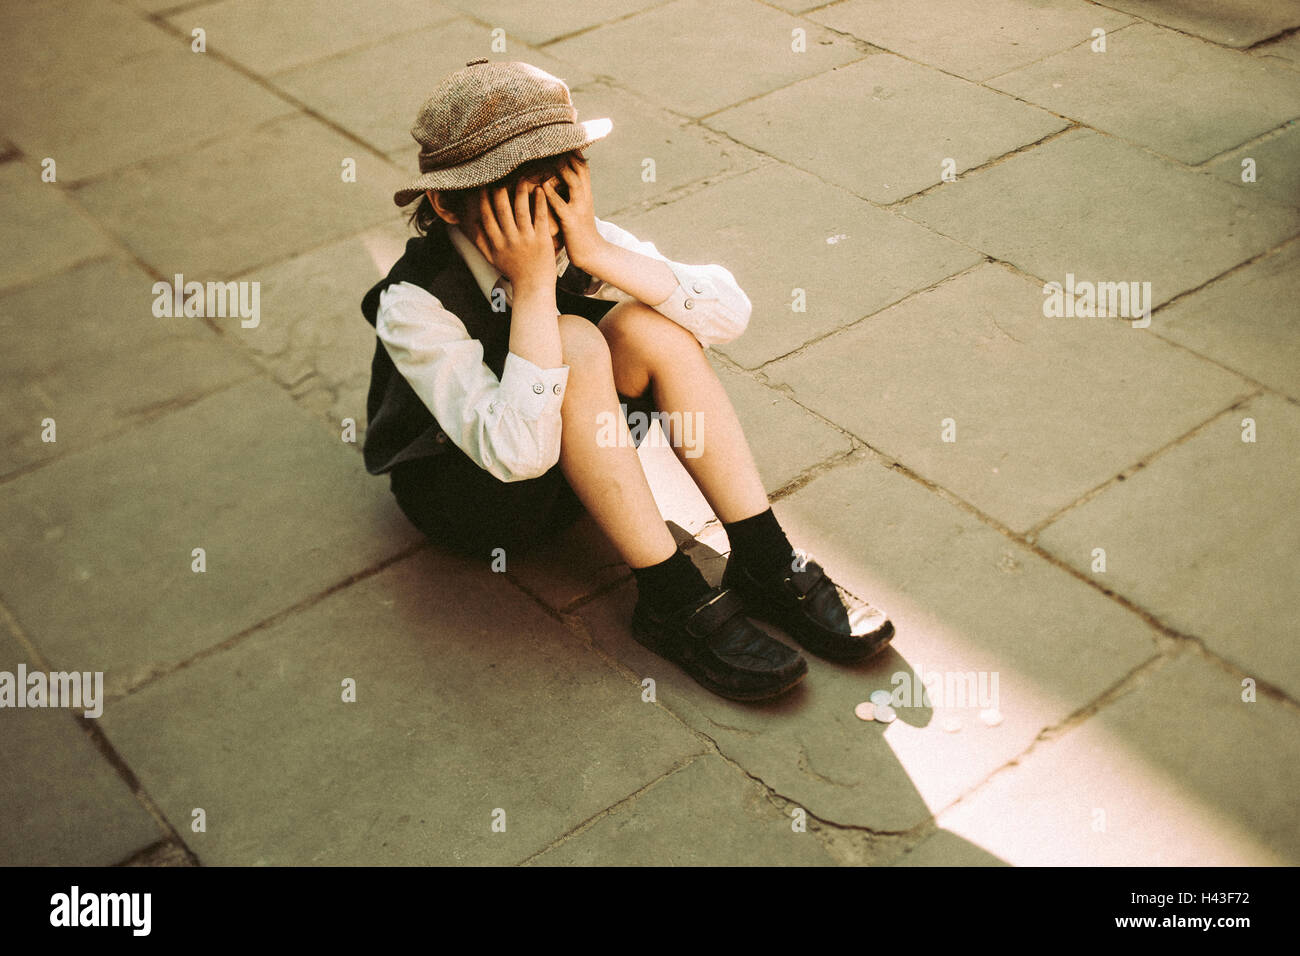 Old-fashioned Caucasian sitting in street crying Stock Photo